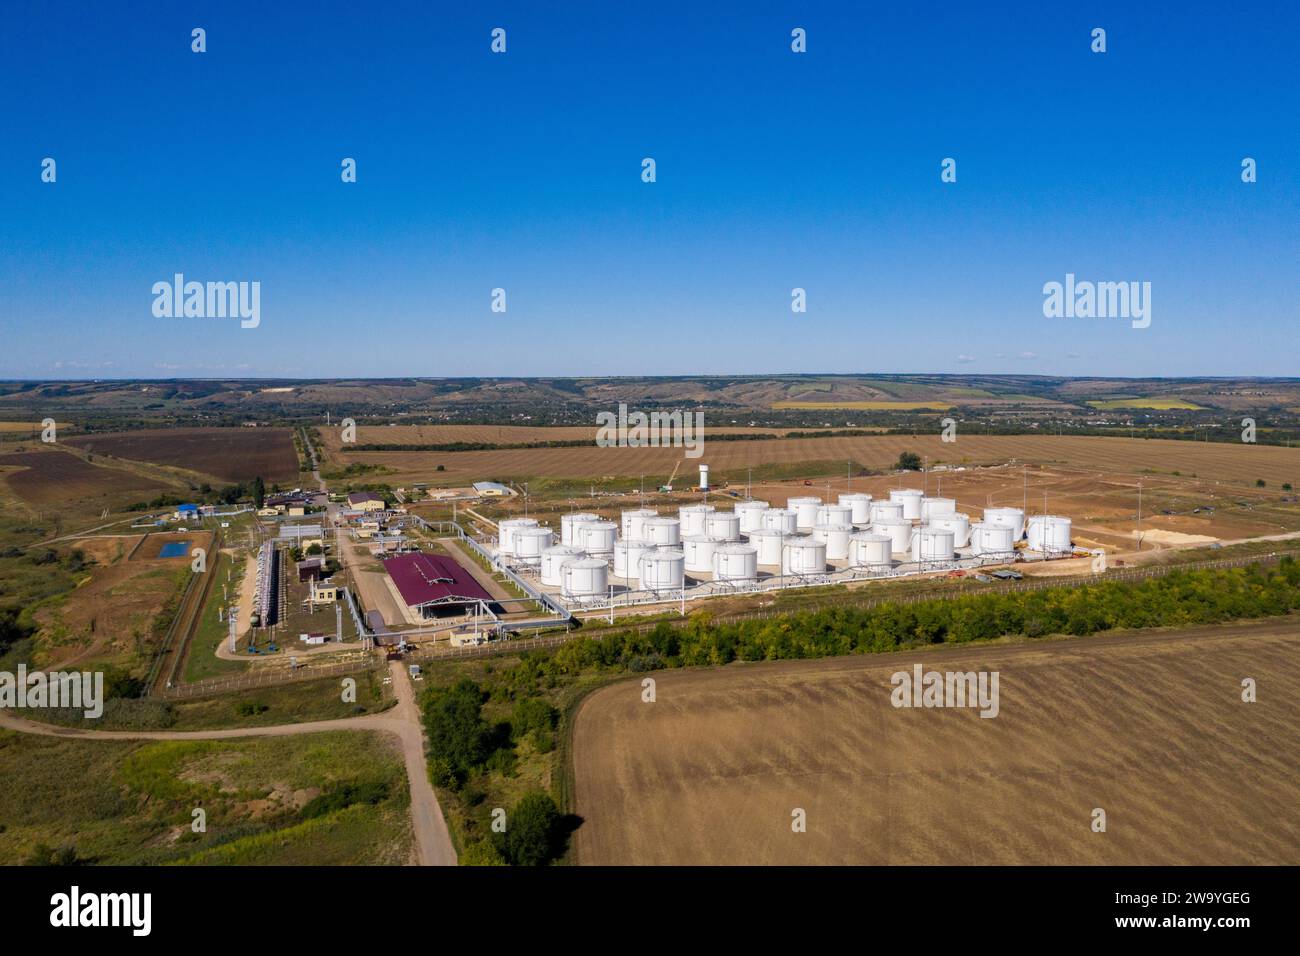 Construction of oil and fuel storage tank farm. Aerial view. Stock Photo